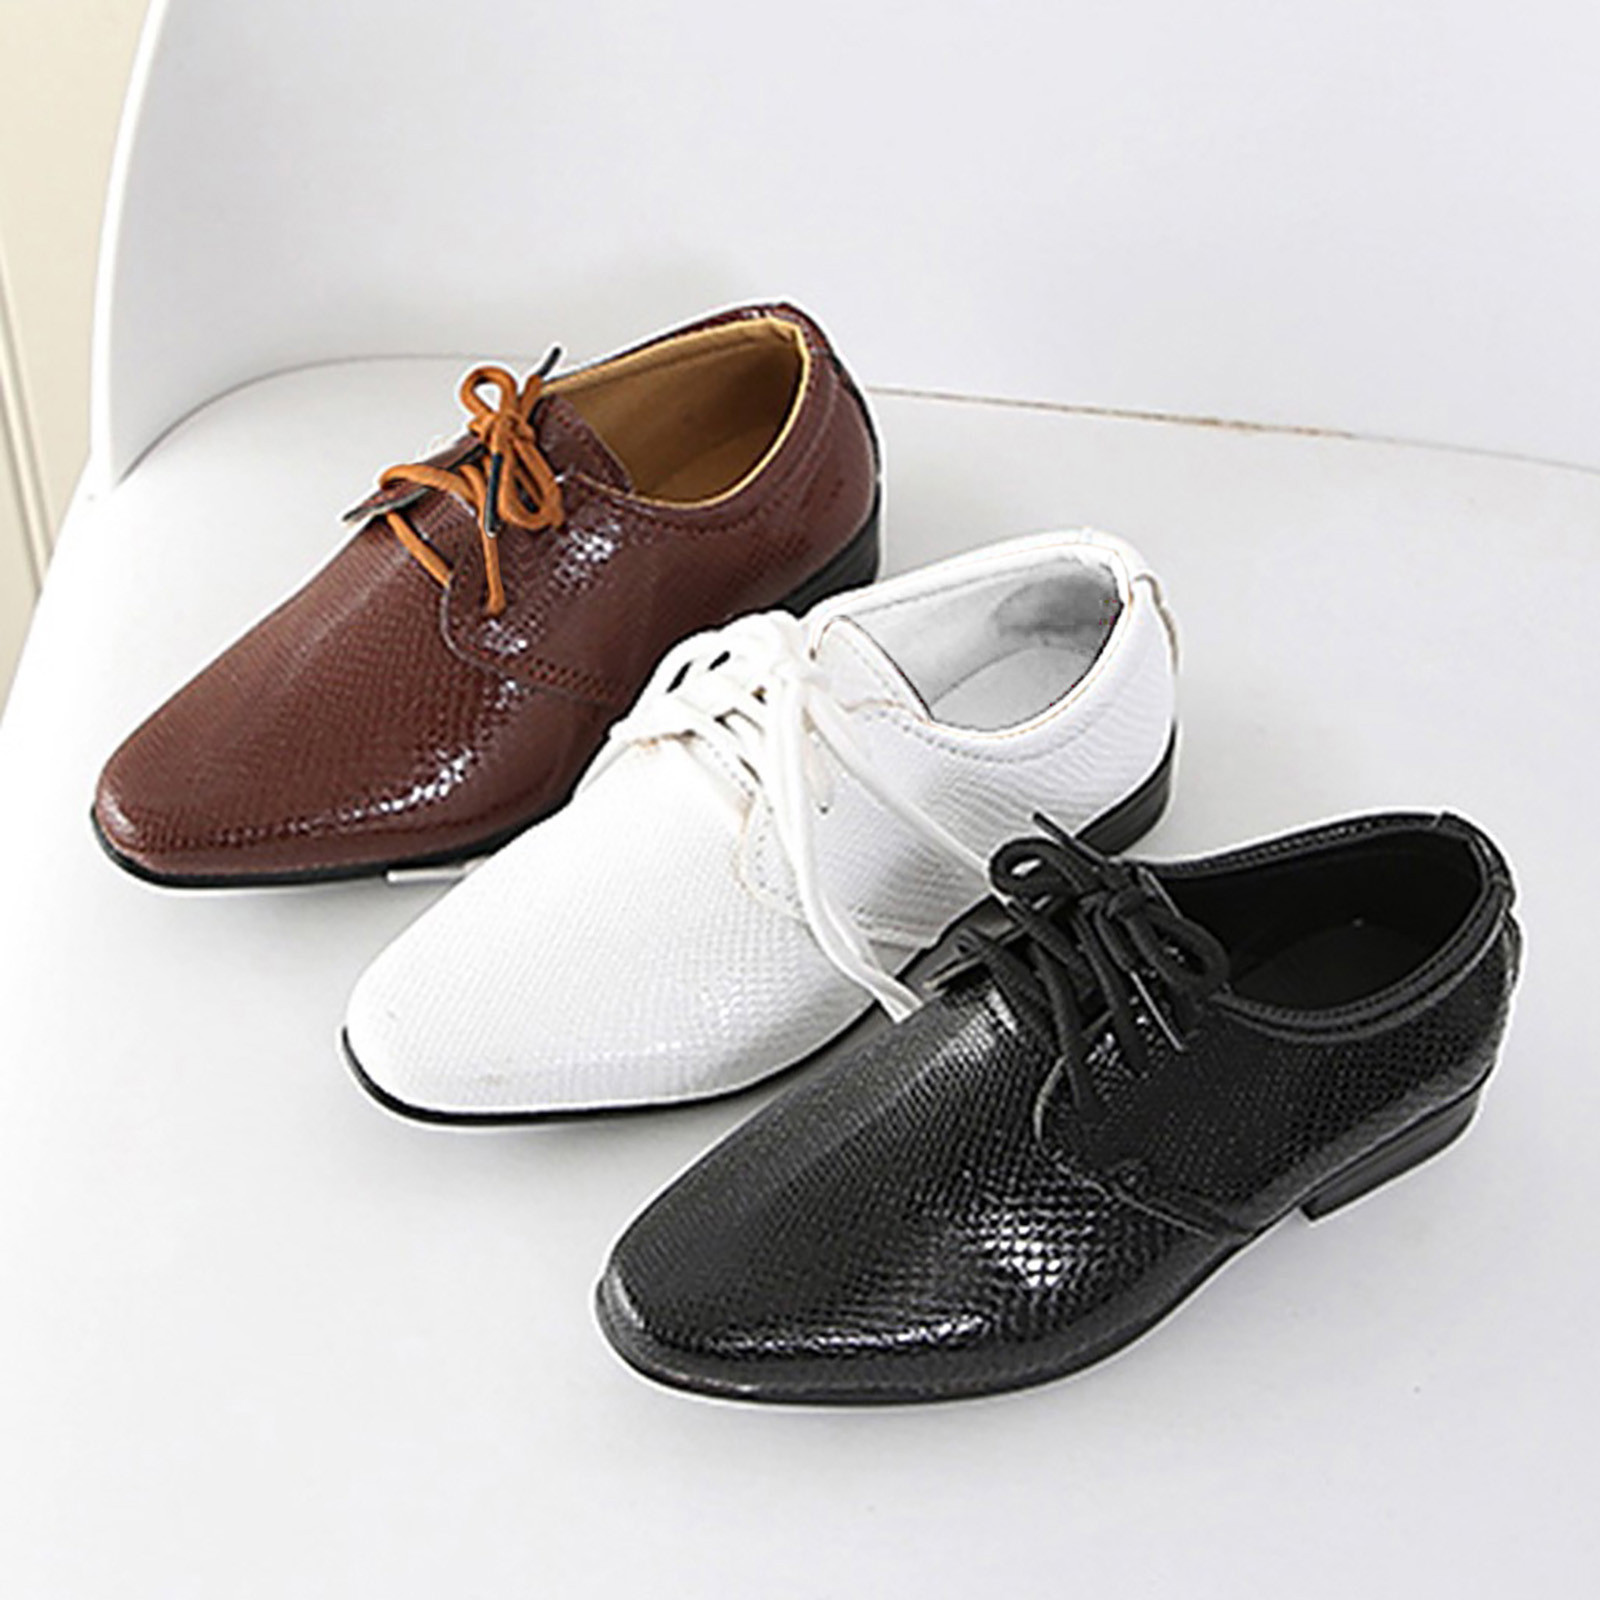 I N C Shoes Student Casual Shoes British Children Infant Perform Baby Kids